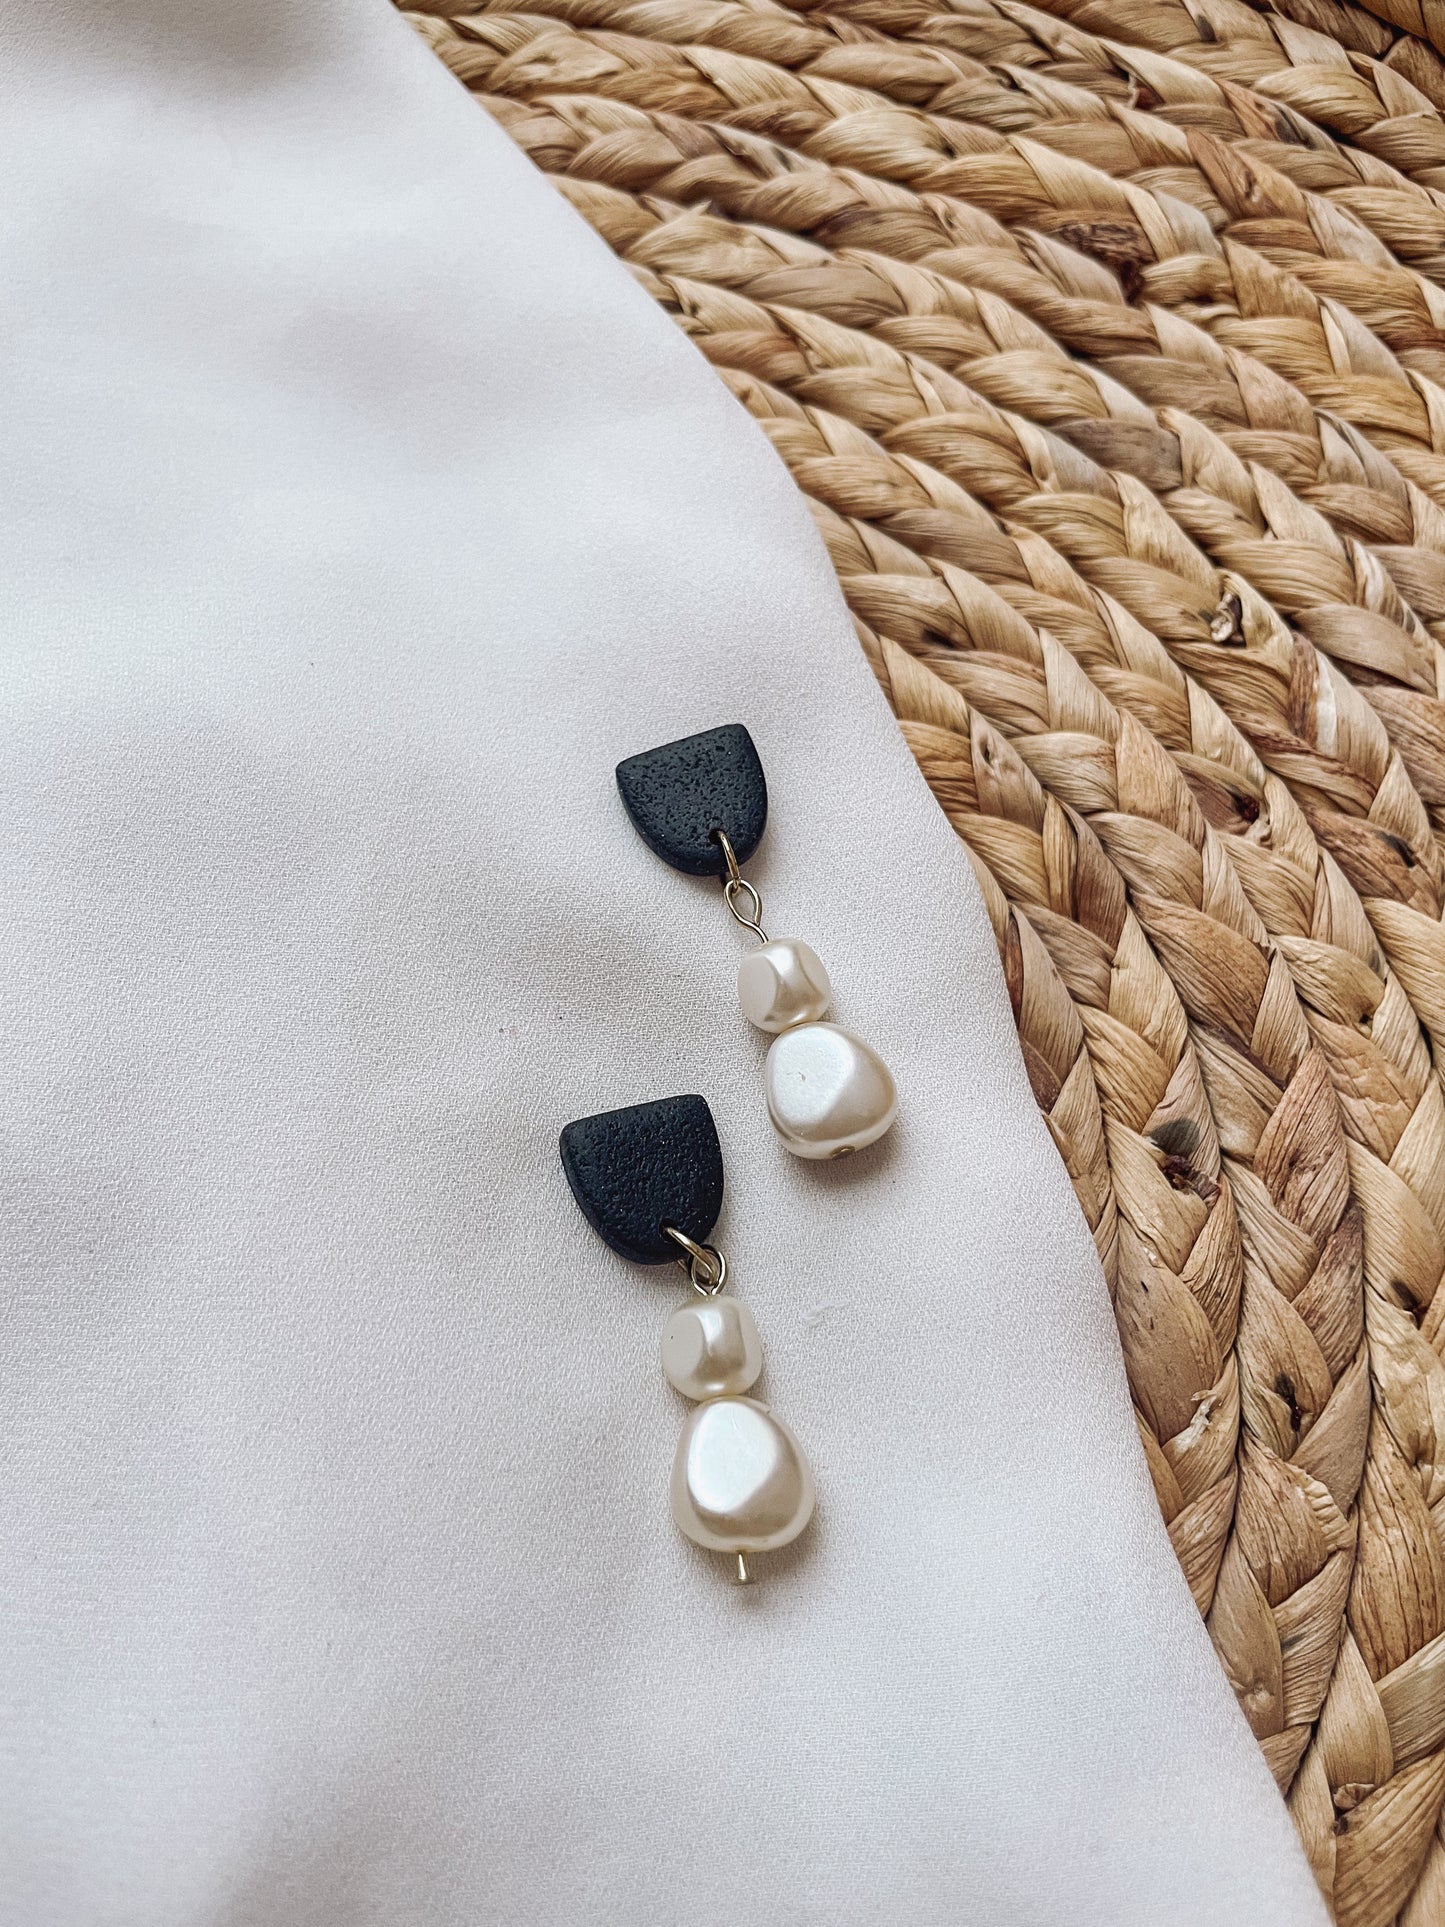 Mini Neutral Earrings with Pearl Accents